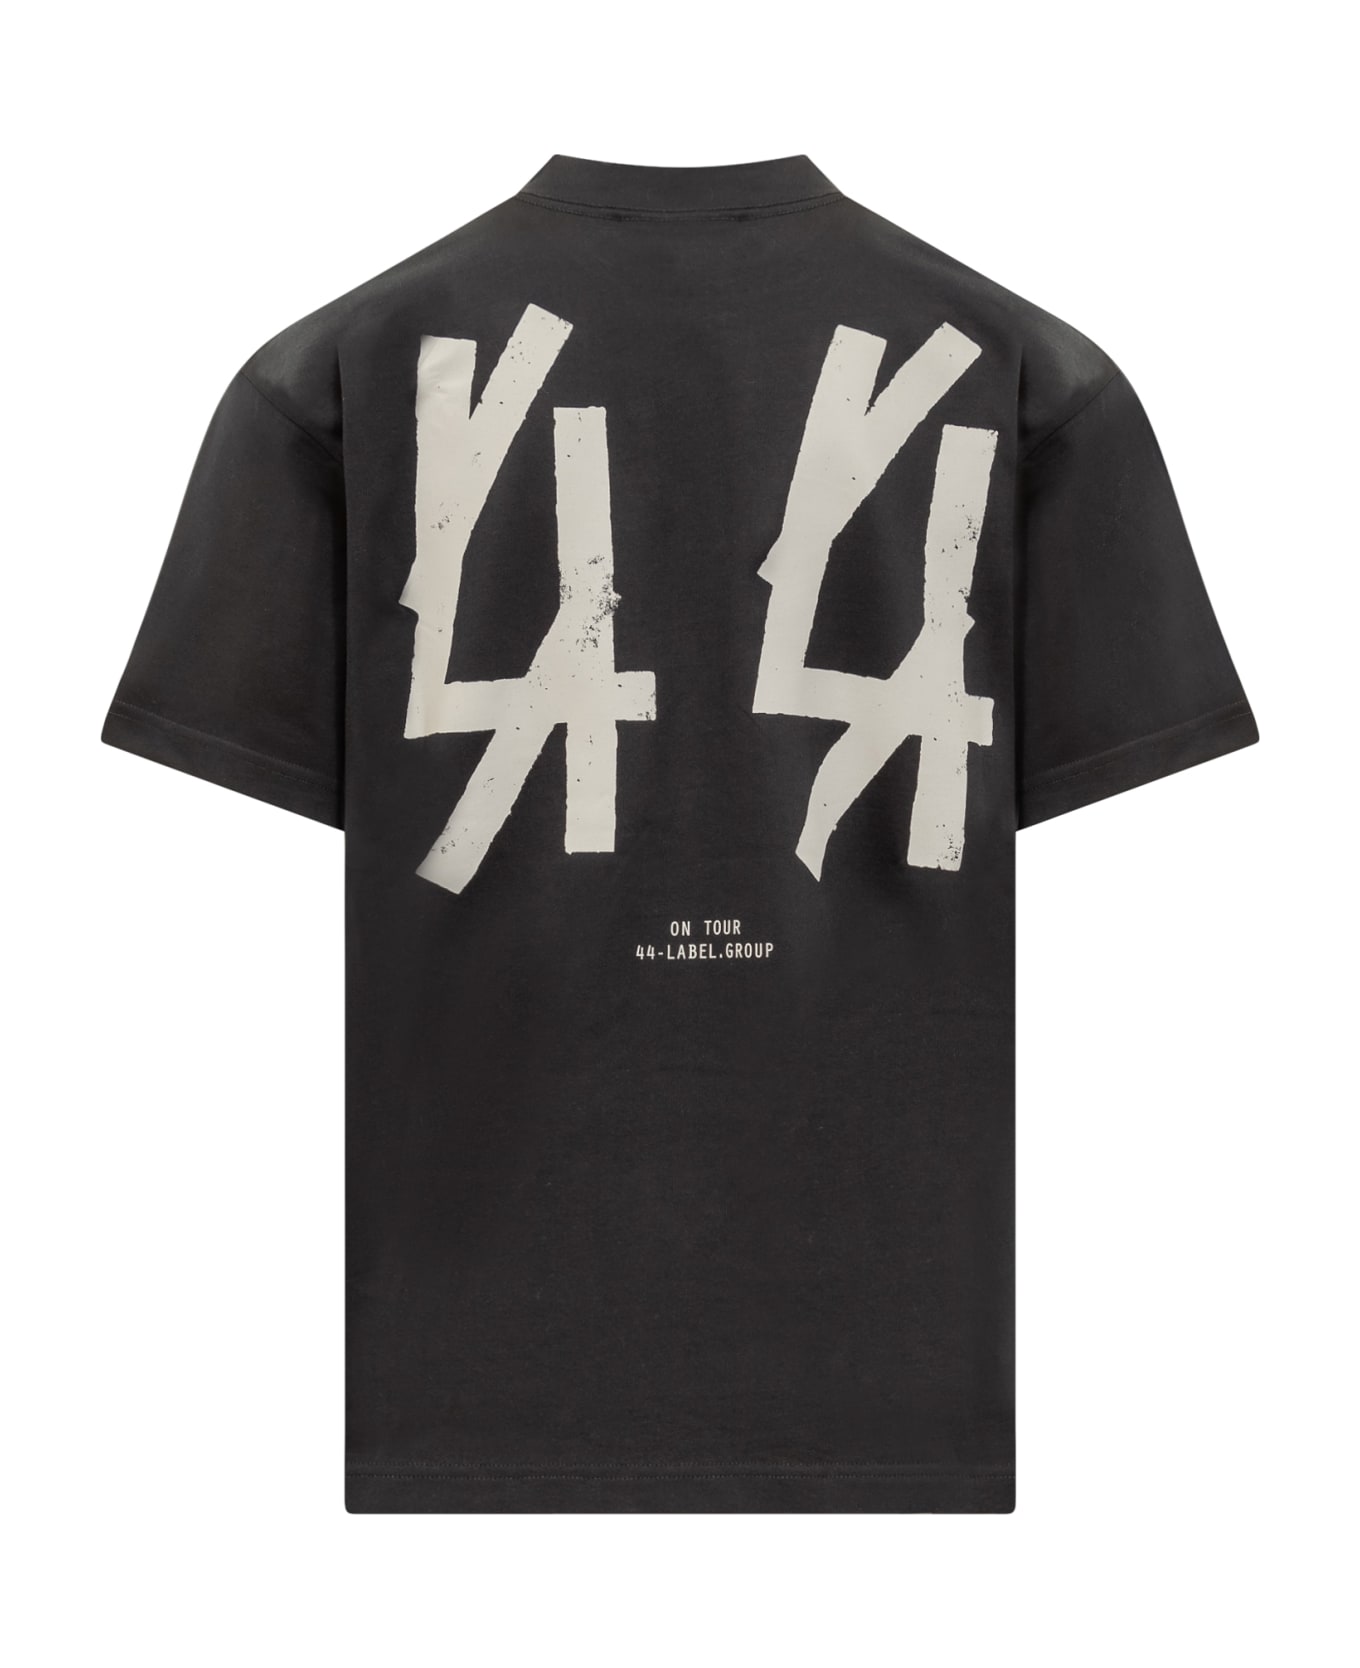 44 Label Group T-shirt With Aaa Print - BLACK-AAA PRINT